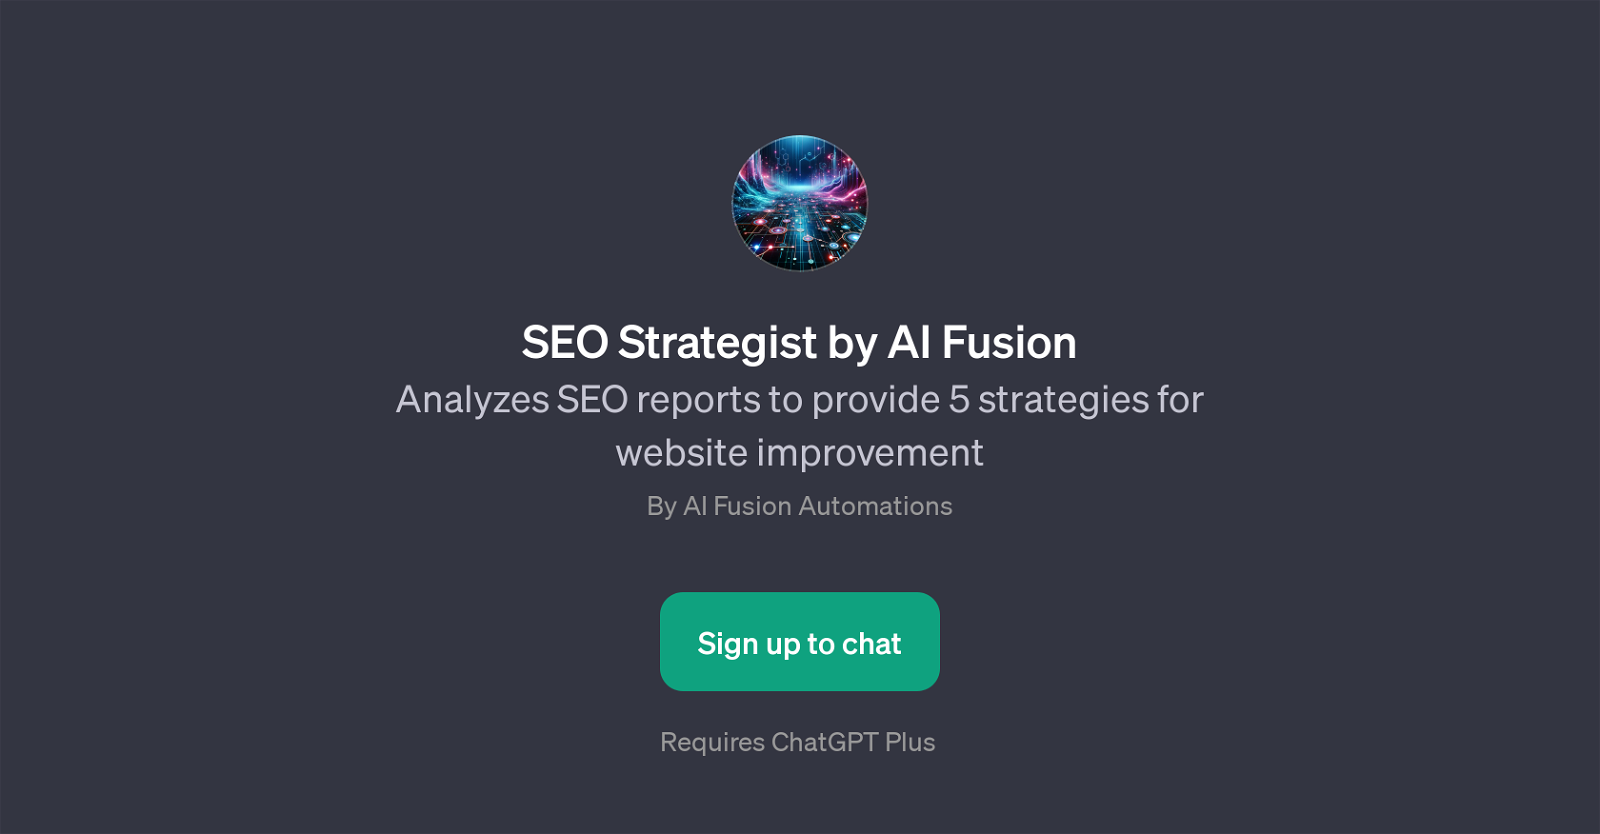 SEO Strategist by AI Fusion website